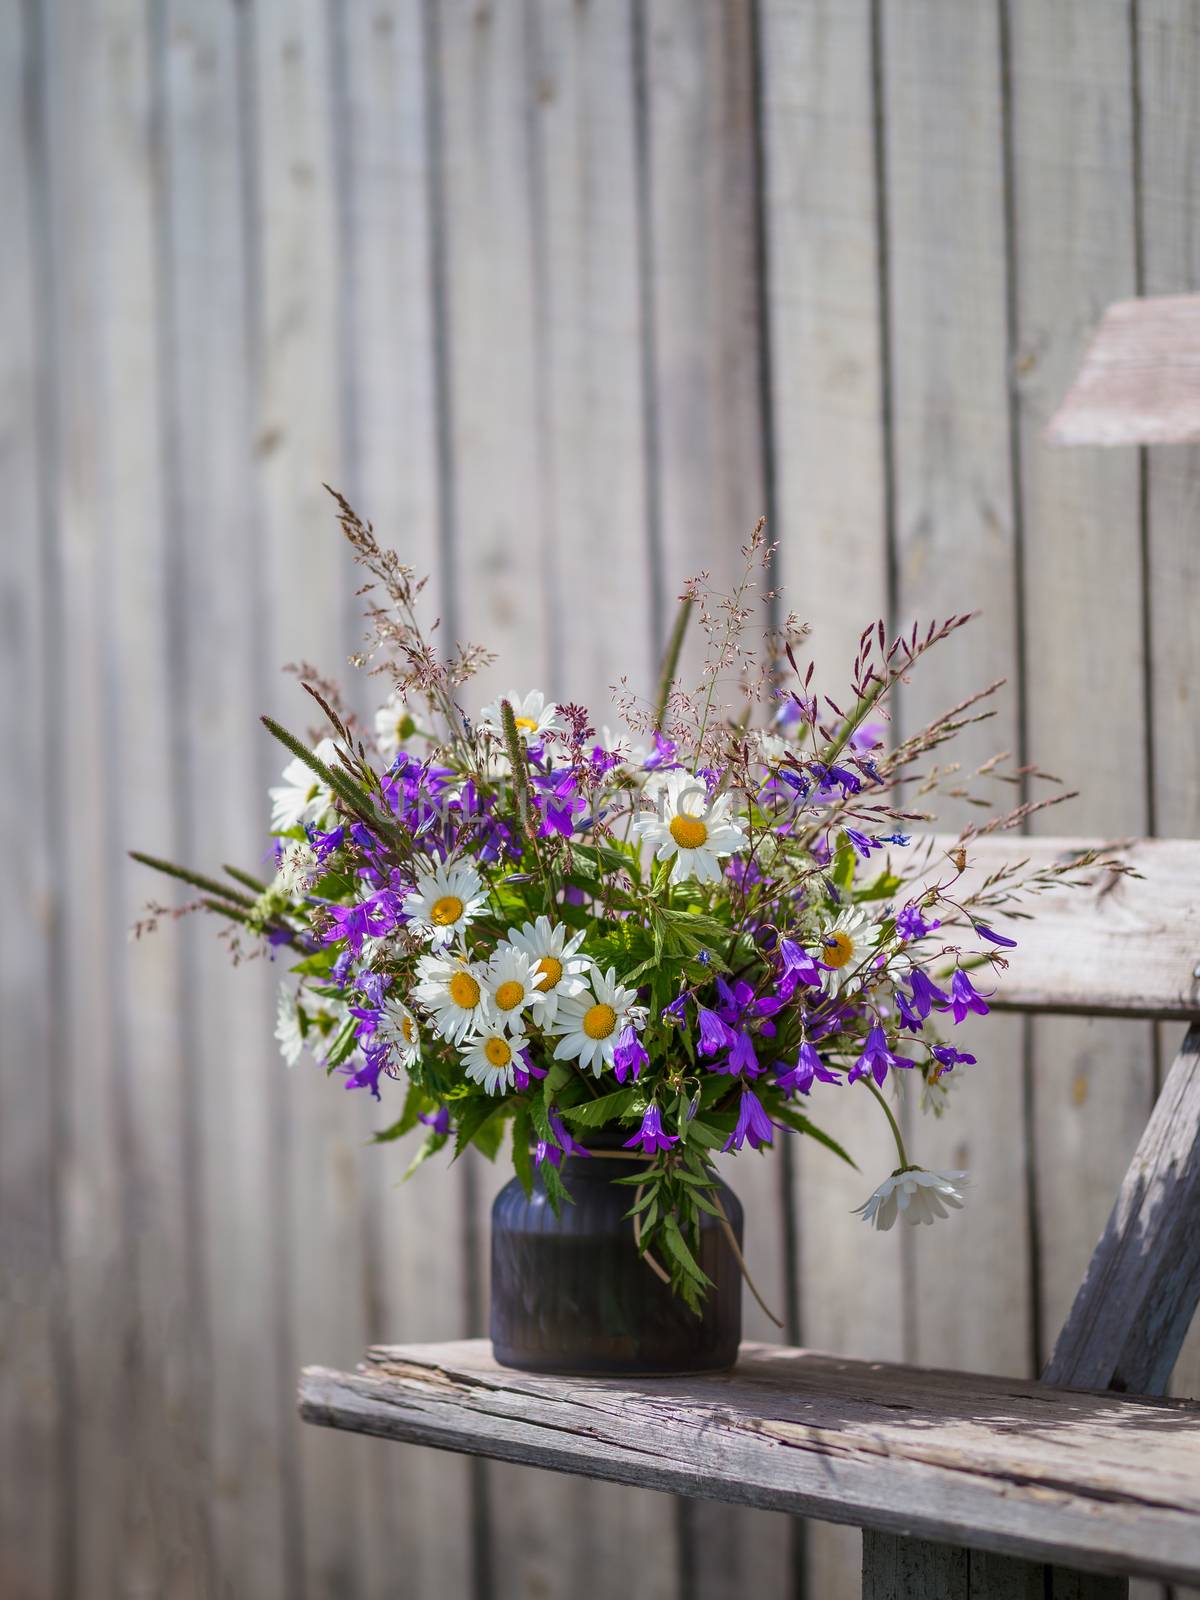 Bouqet with wild flowers on old wooden bench. Field flowers bouqet with campanula and camomile. Cottagecore and farmcore concept. Copy space